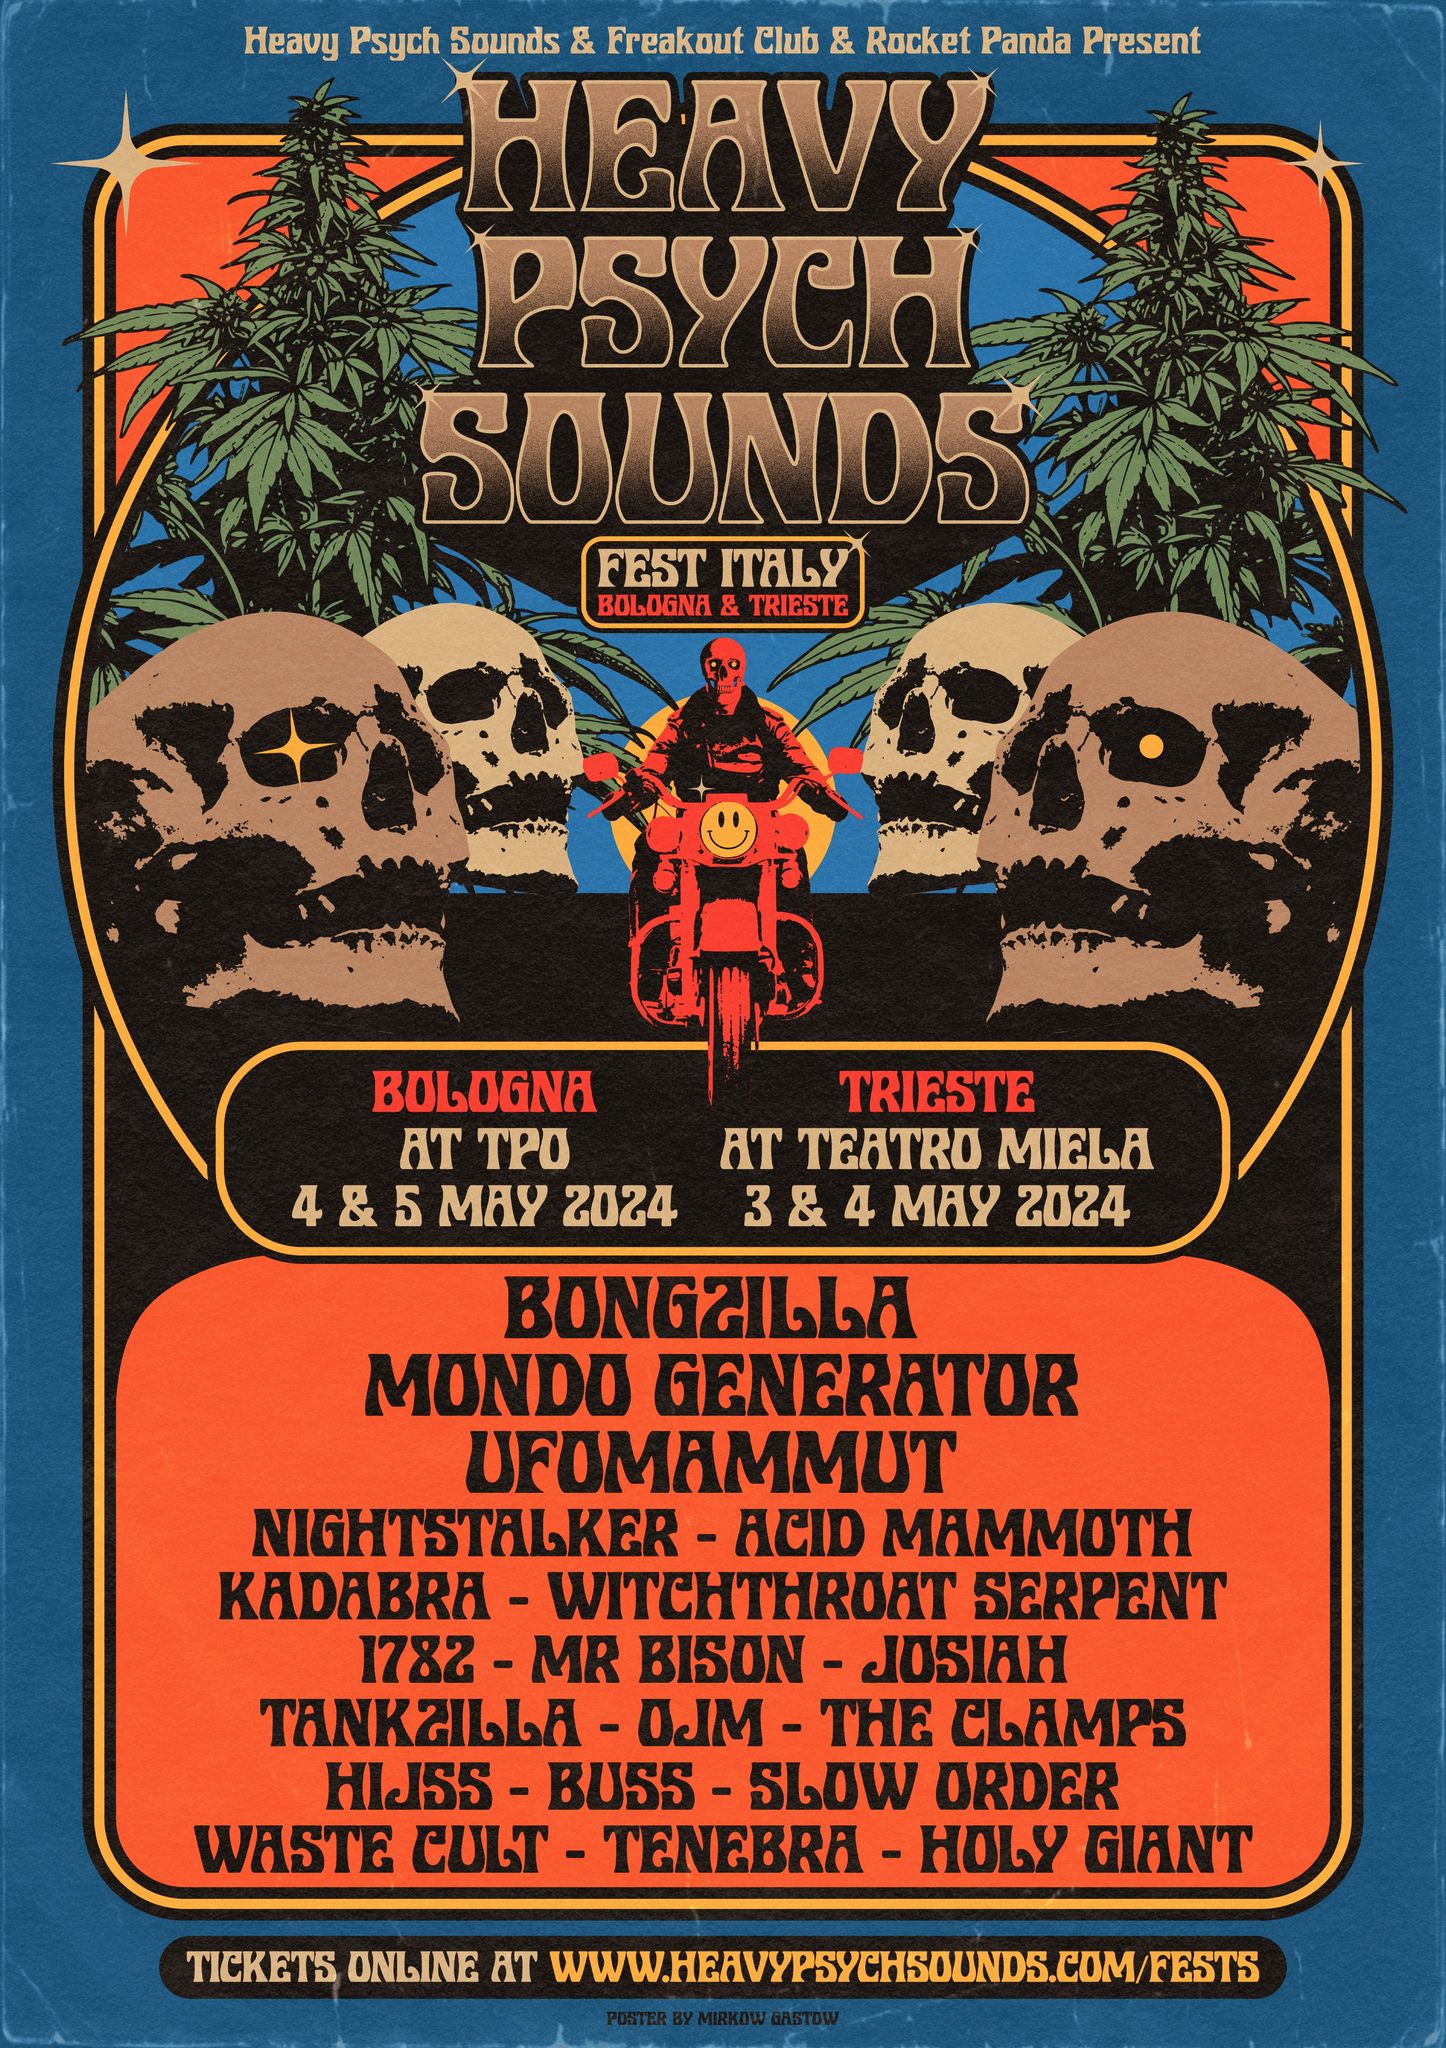 Heavy Psych Sounds to announce HEAVY PSYCH SOUNDS FEST ITALY 2024 Bologna & Trieste – TIMETABLES !!!